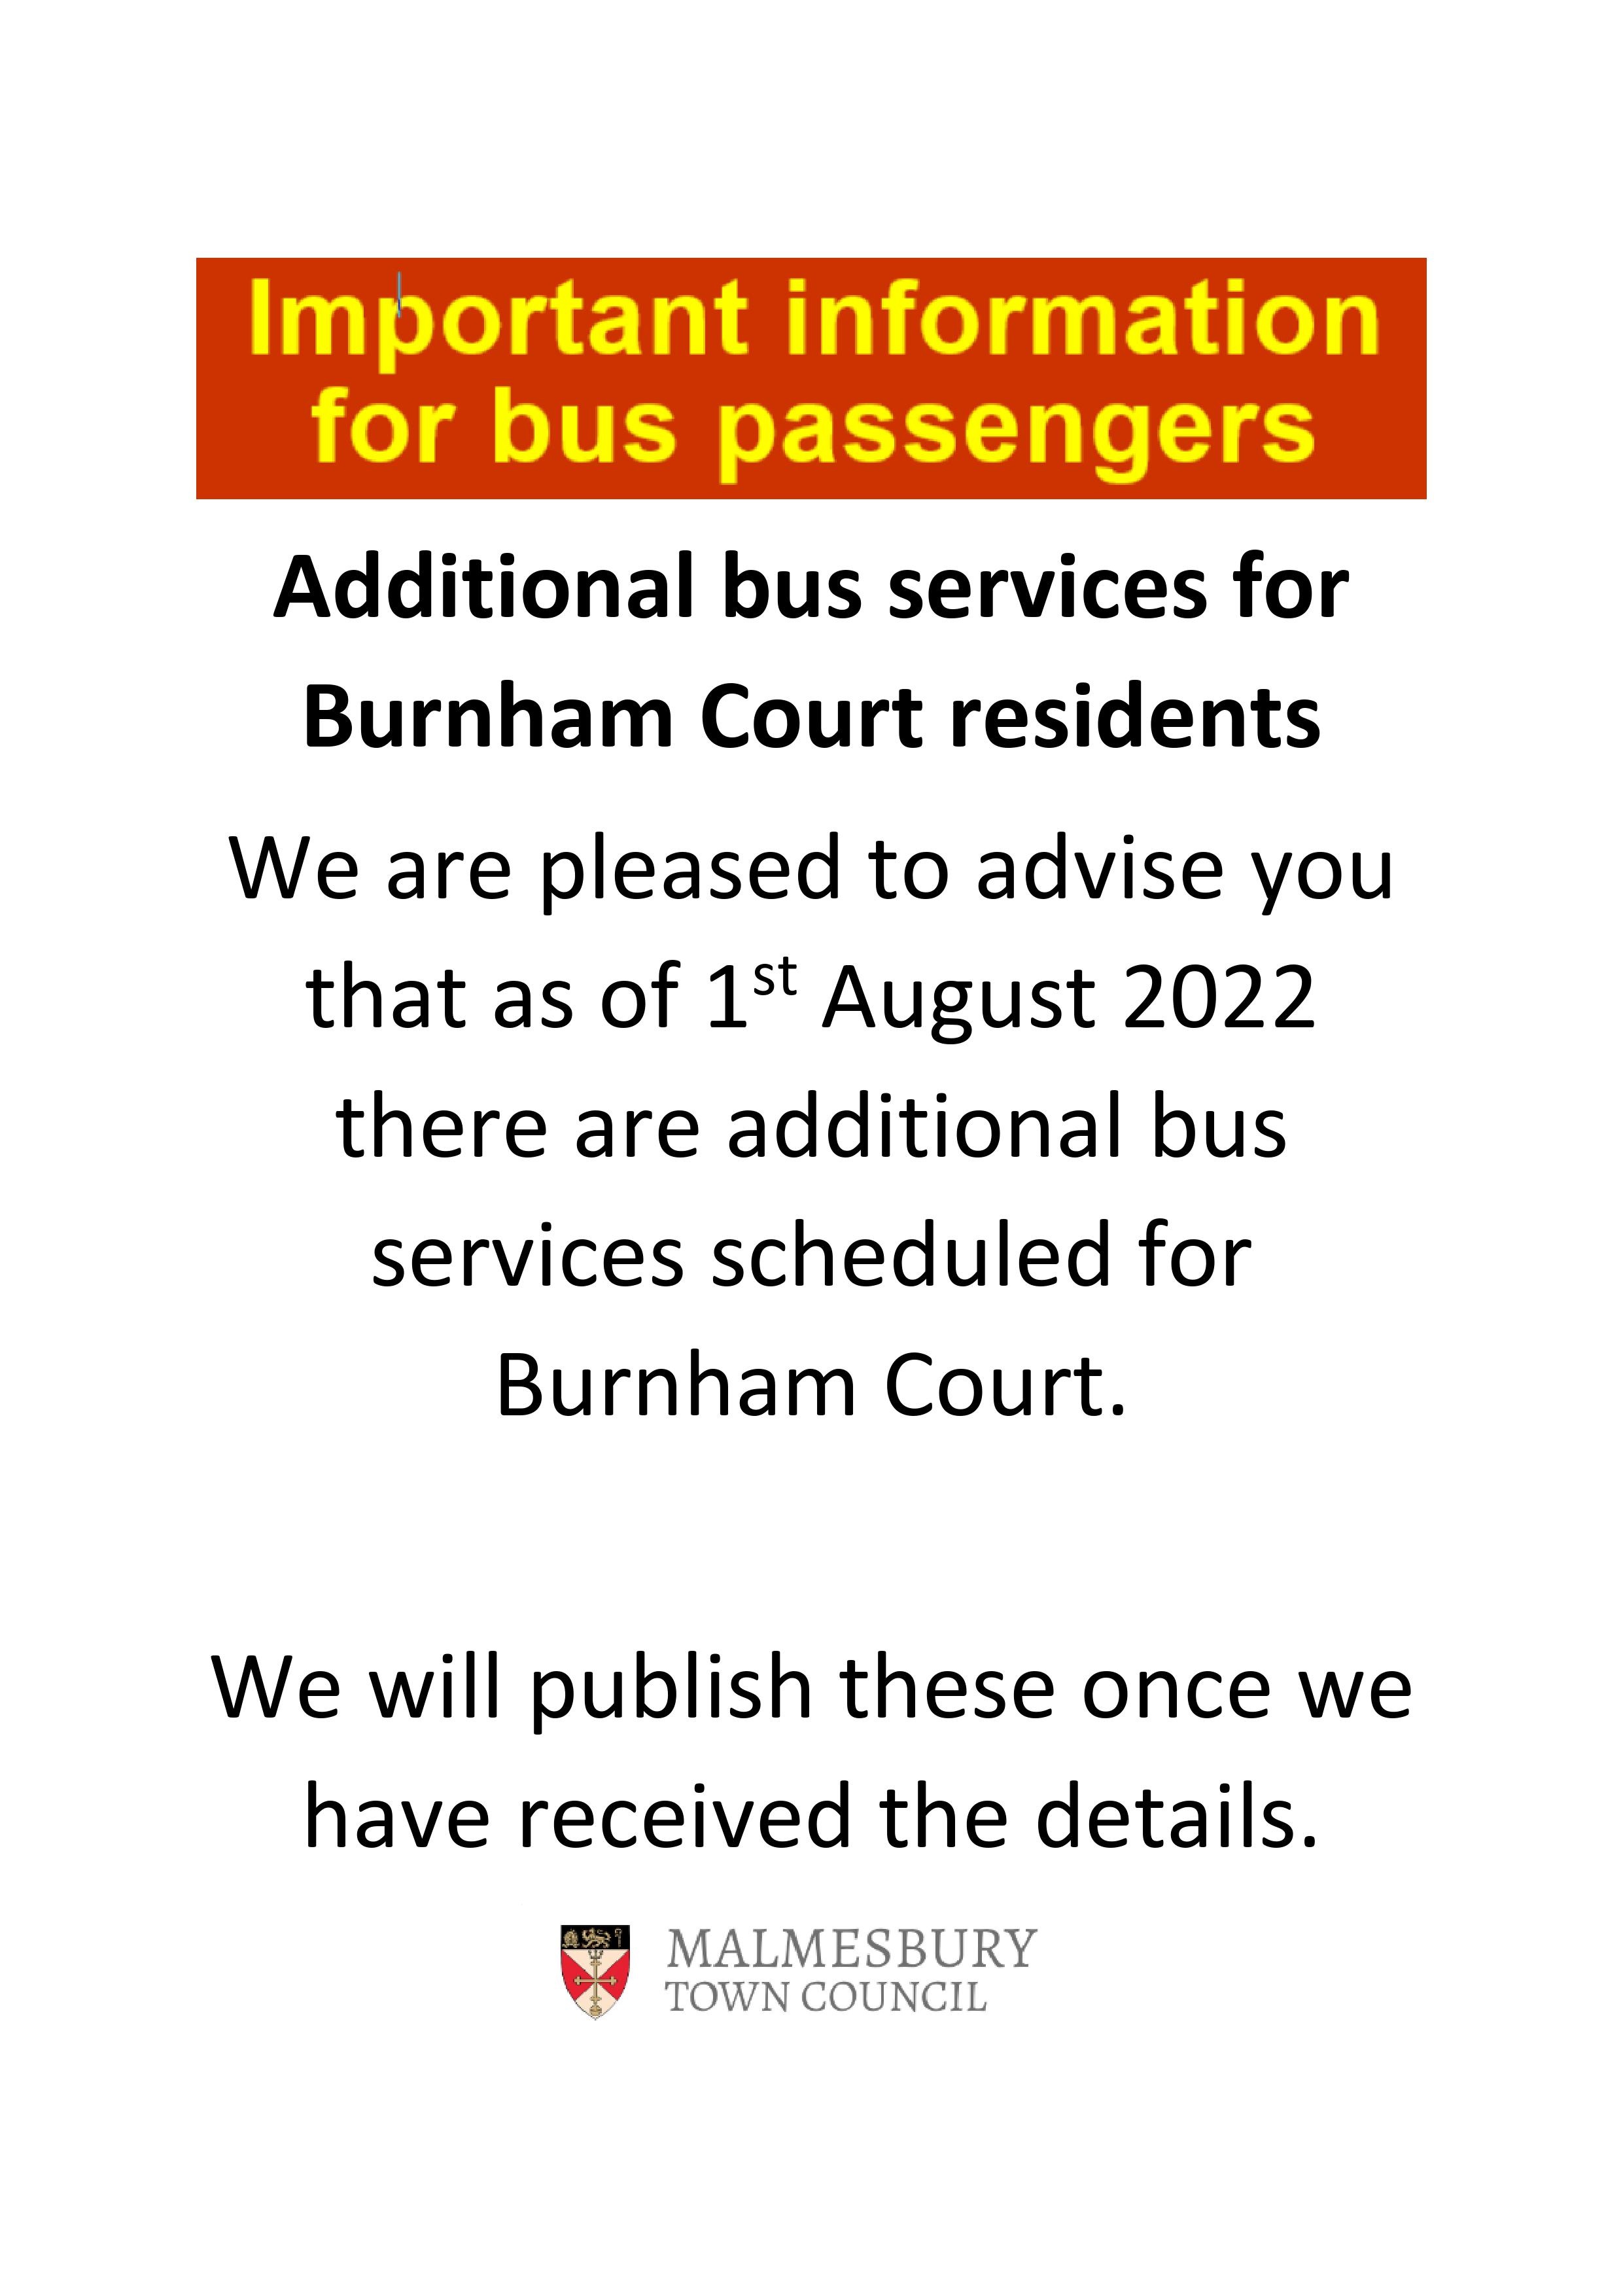 Important Information on Additional Bus Services for Burnham Court